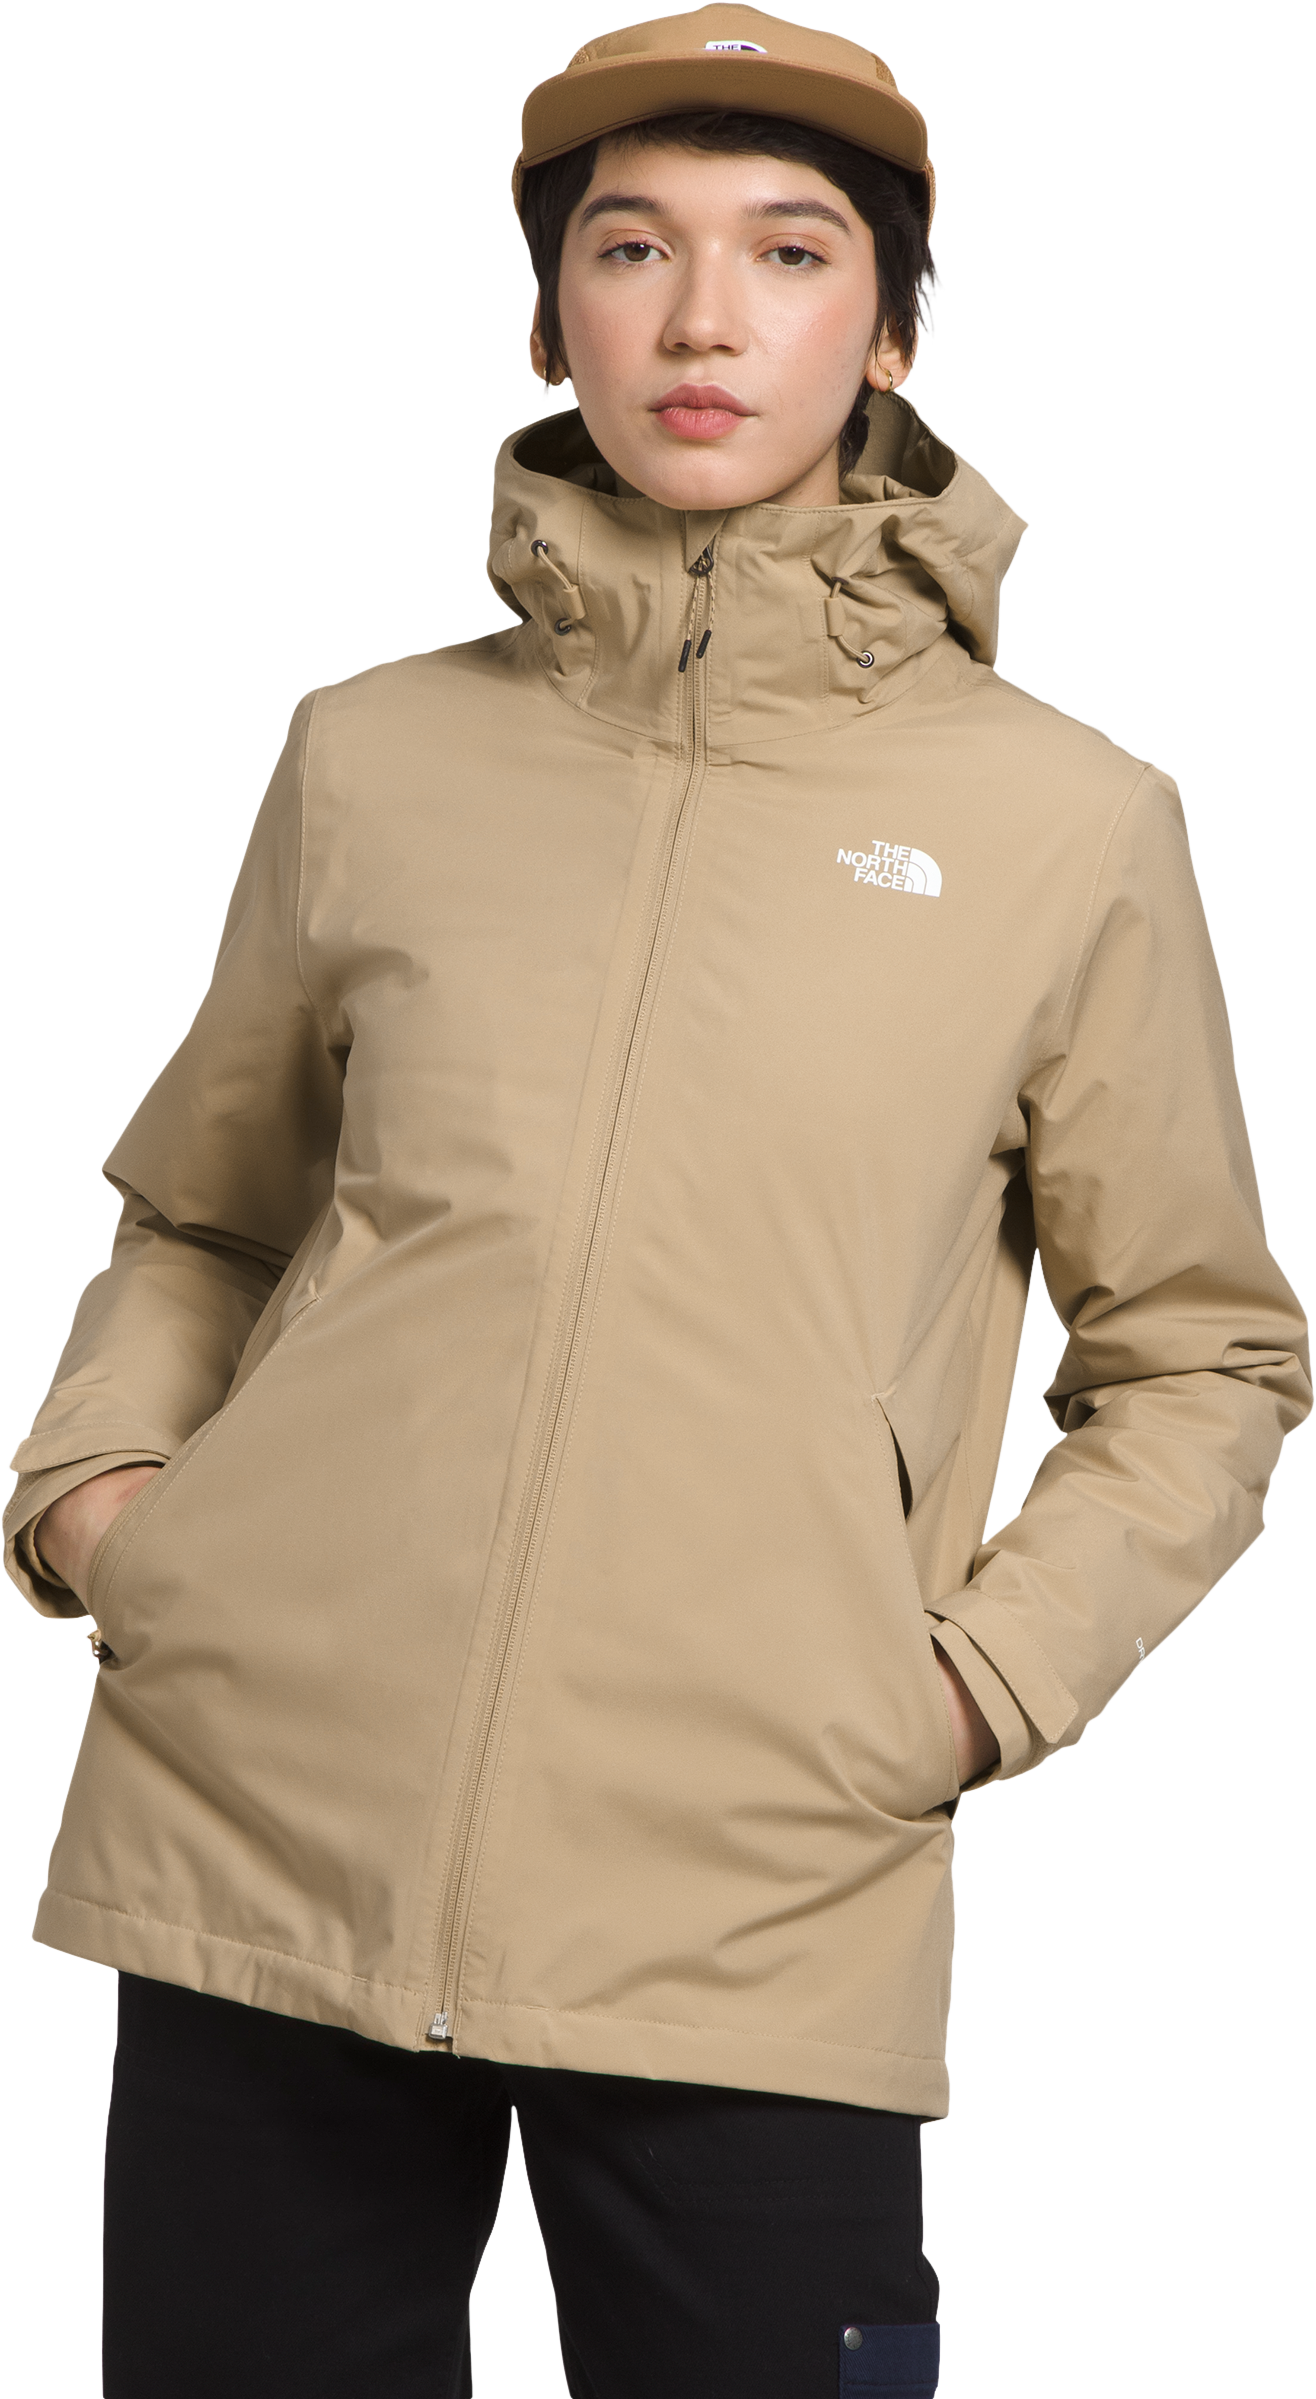 The North Face Carto Triclimate 3-in-1 Jacket for Ladies - Khaki Stone - M